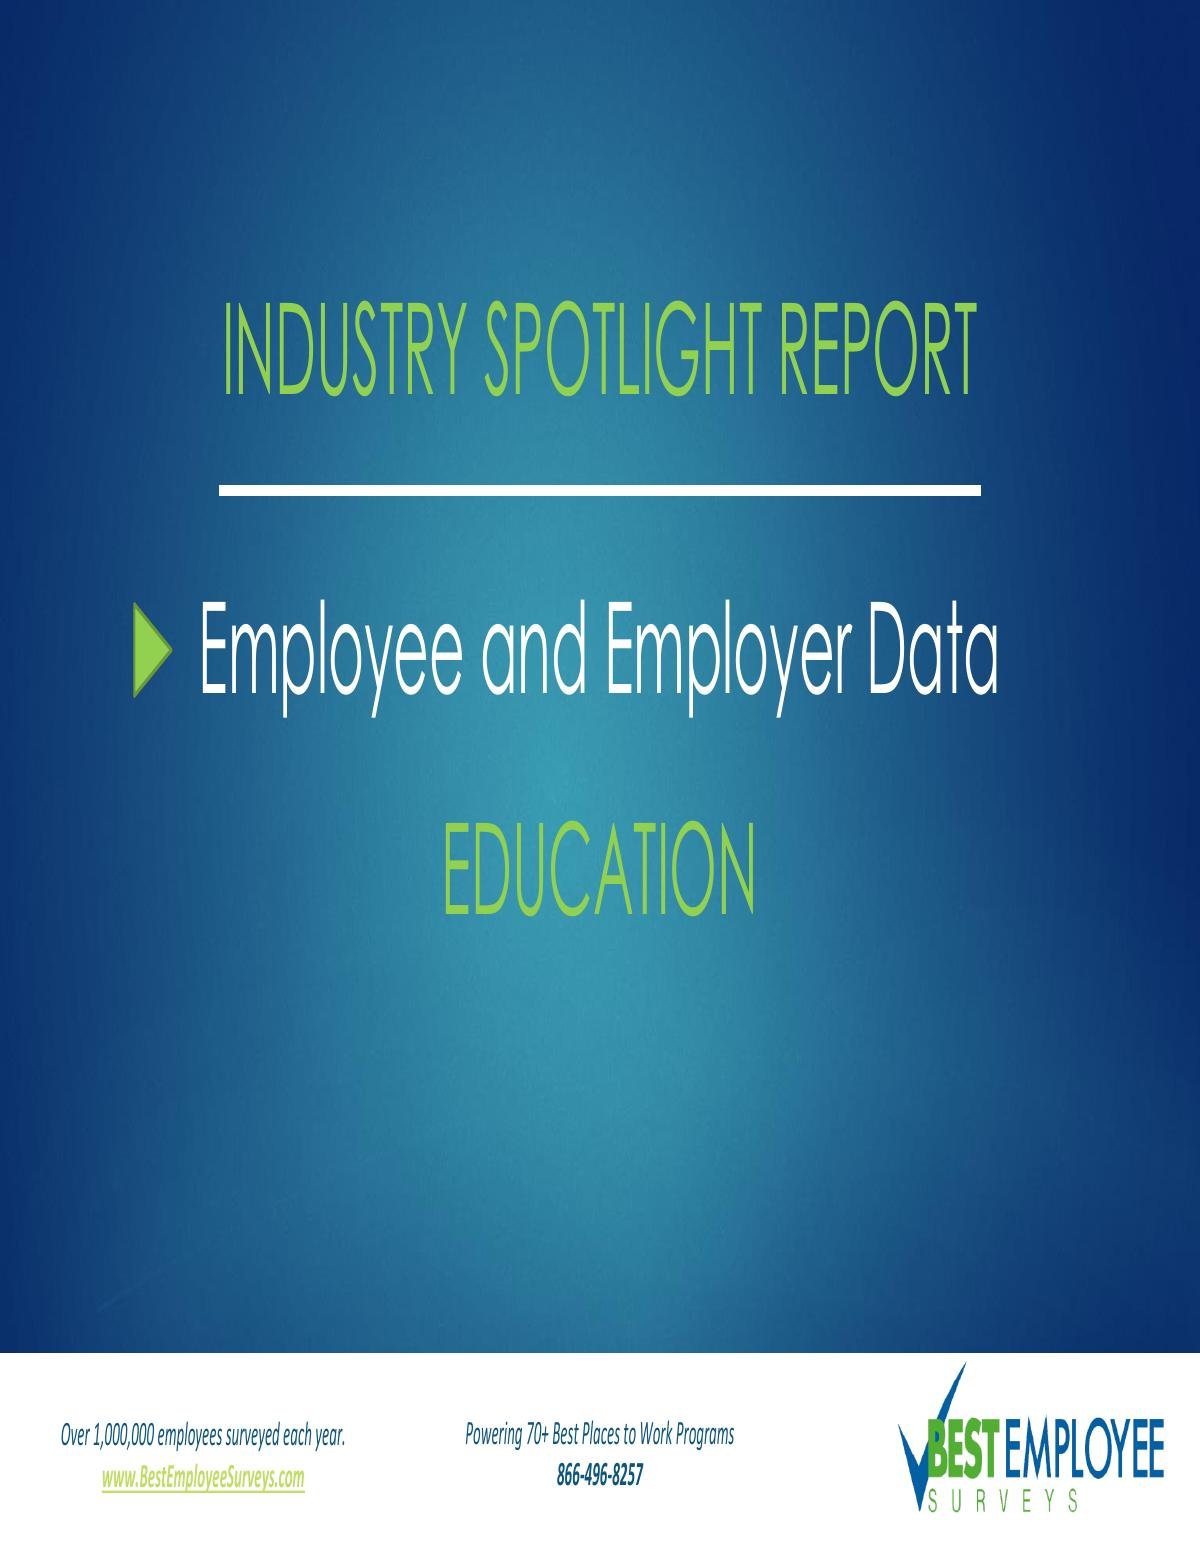 2019 Employee Engagement and Satisfaction Report: Education